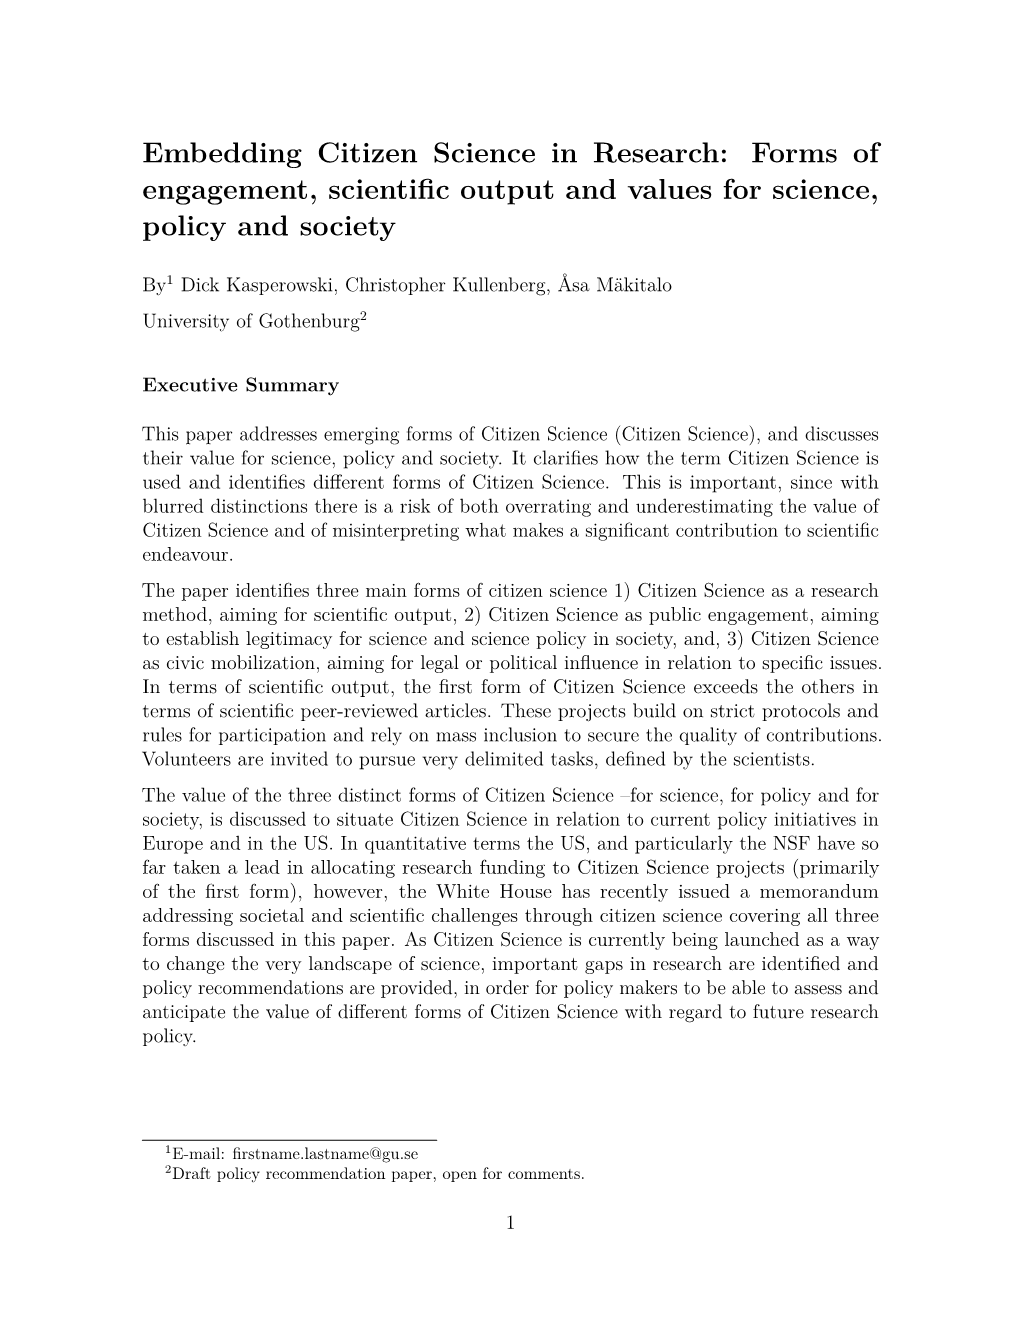 Embedding Citizen Science in Research: Forms of Engagement, Scientiﬁc Output and Values for Science, Policy and Society